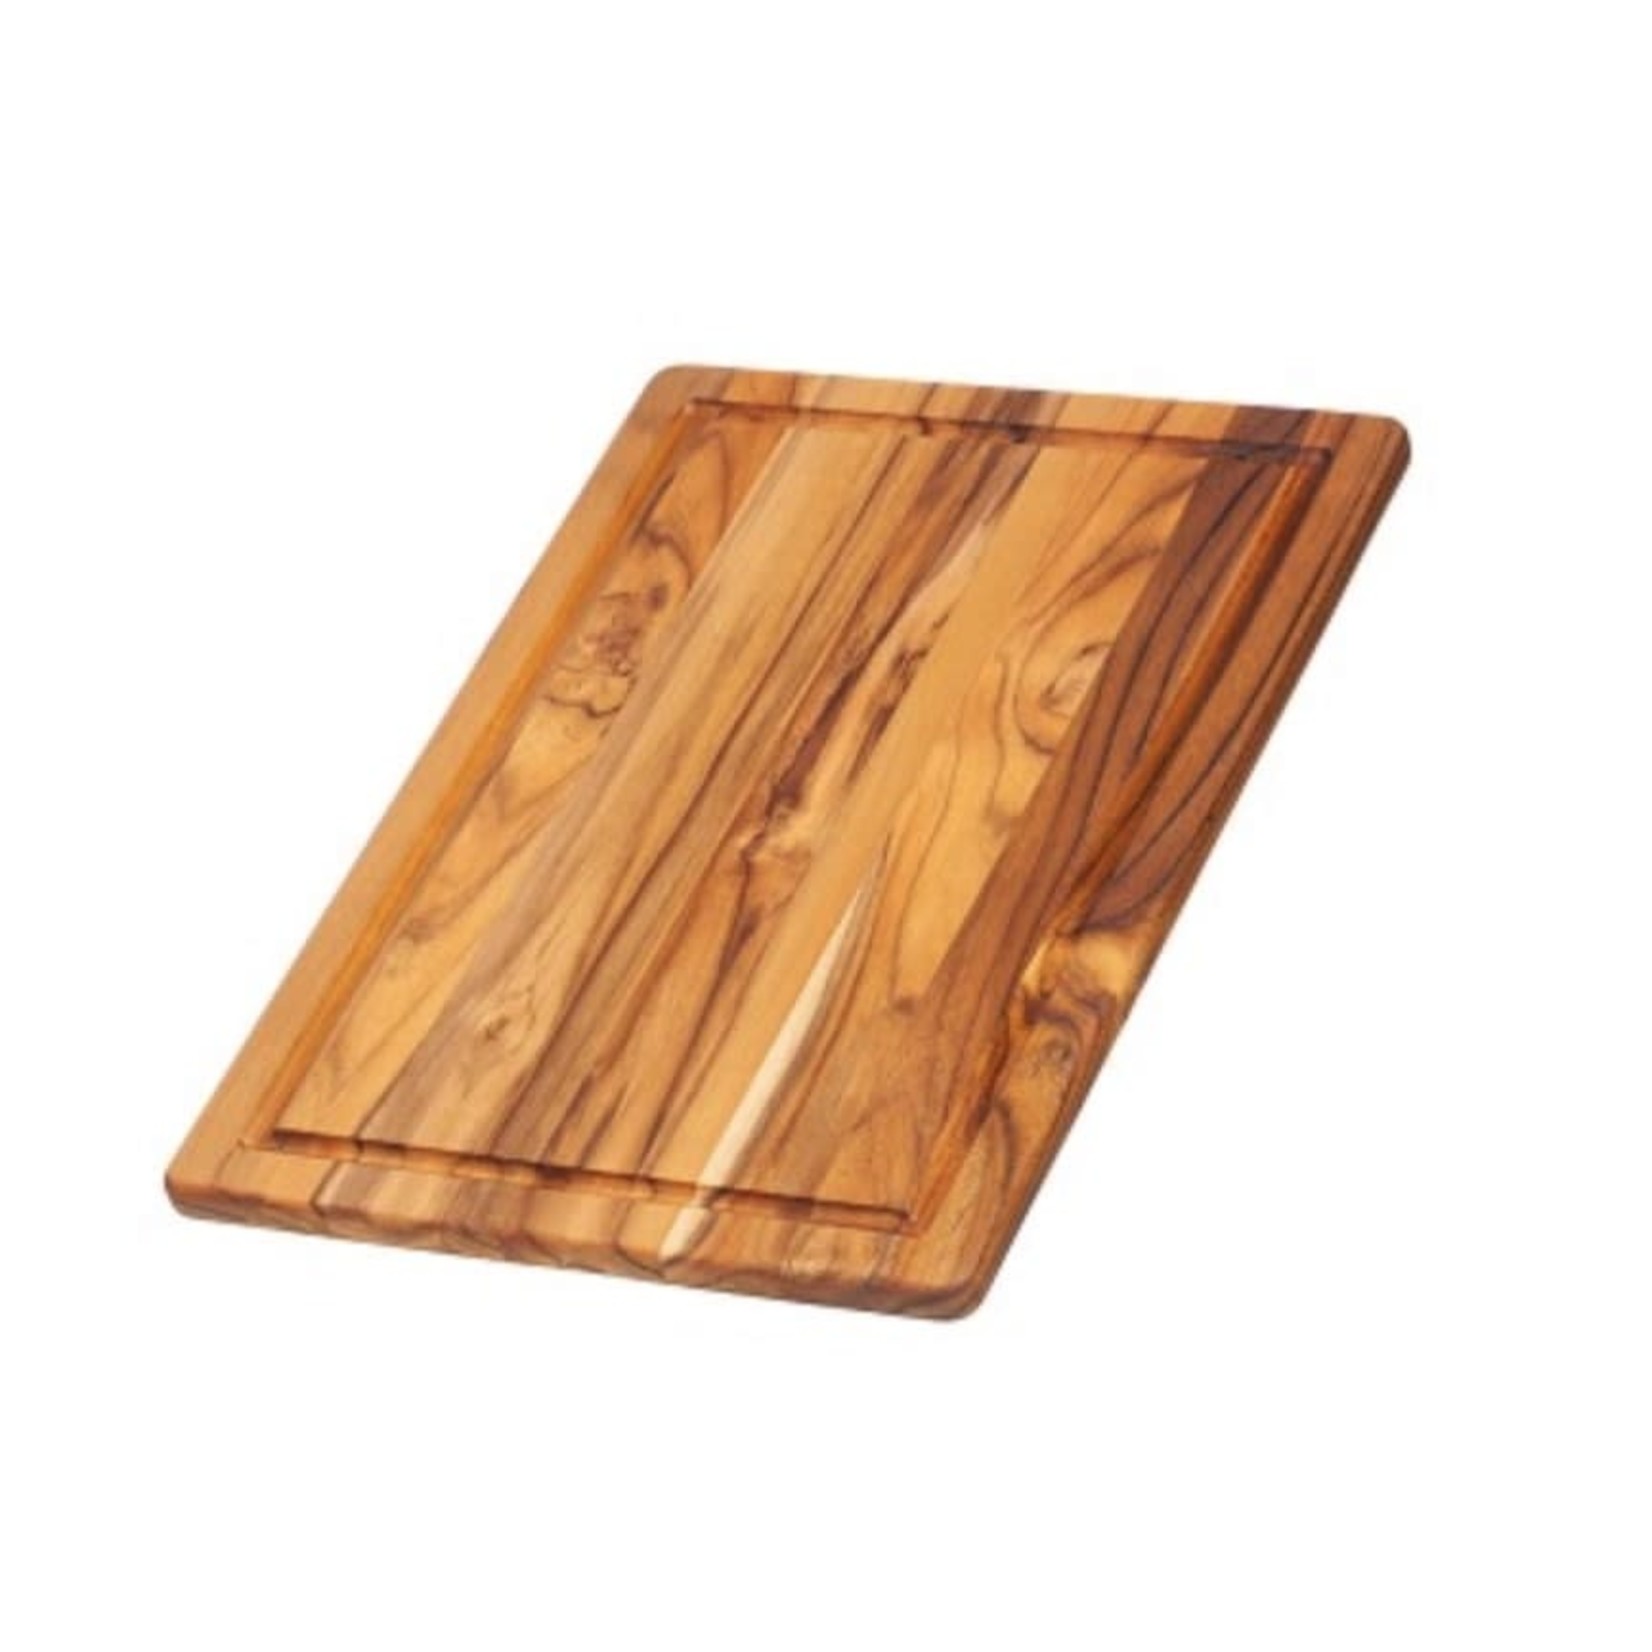 TEAKHAUS TEAKHAUS Cutting / Serving Board with Juice Canal 16x11"